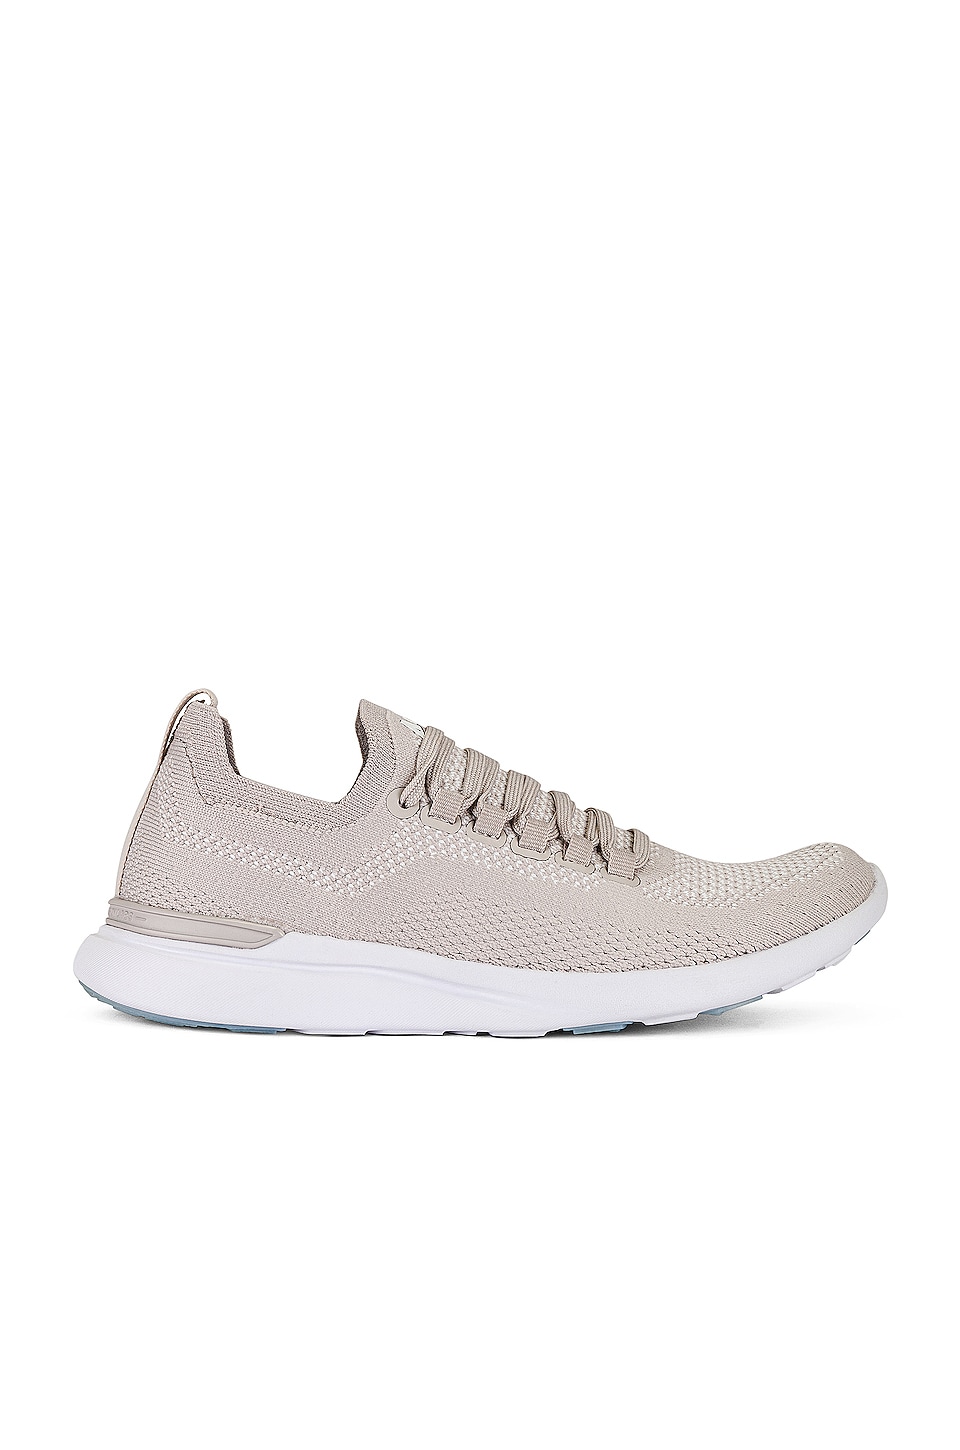 Image 1 of TechLoom Breeze Sneaker in Clay, Ivory, & White